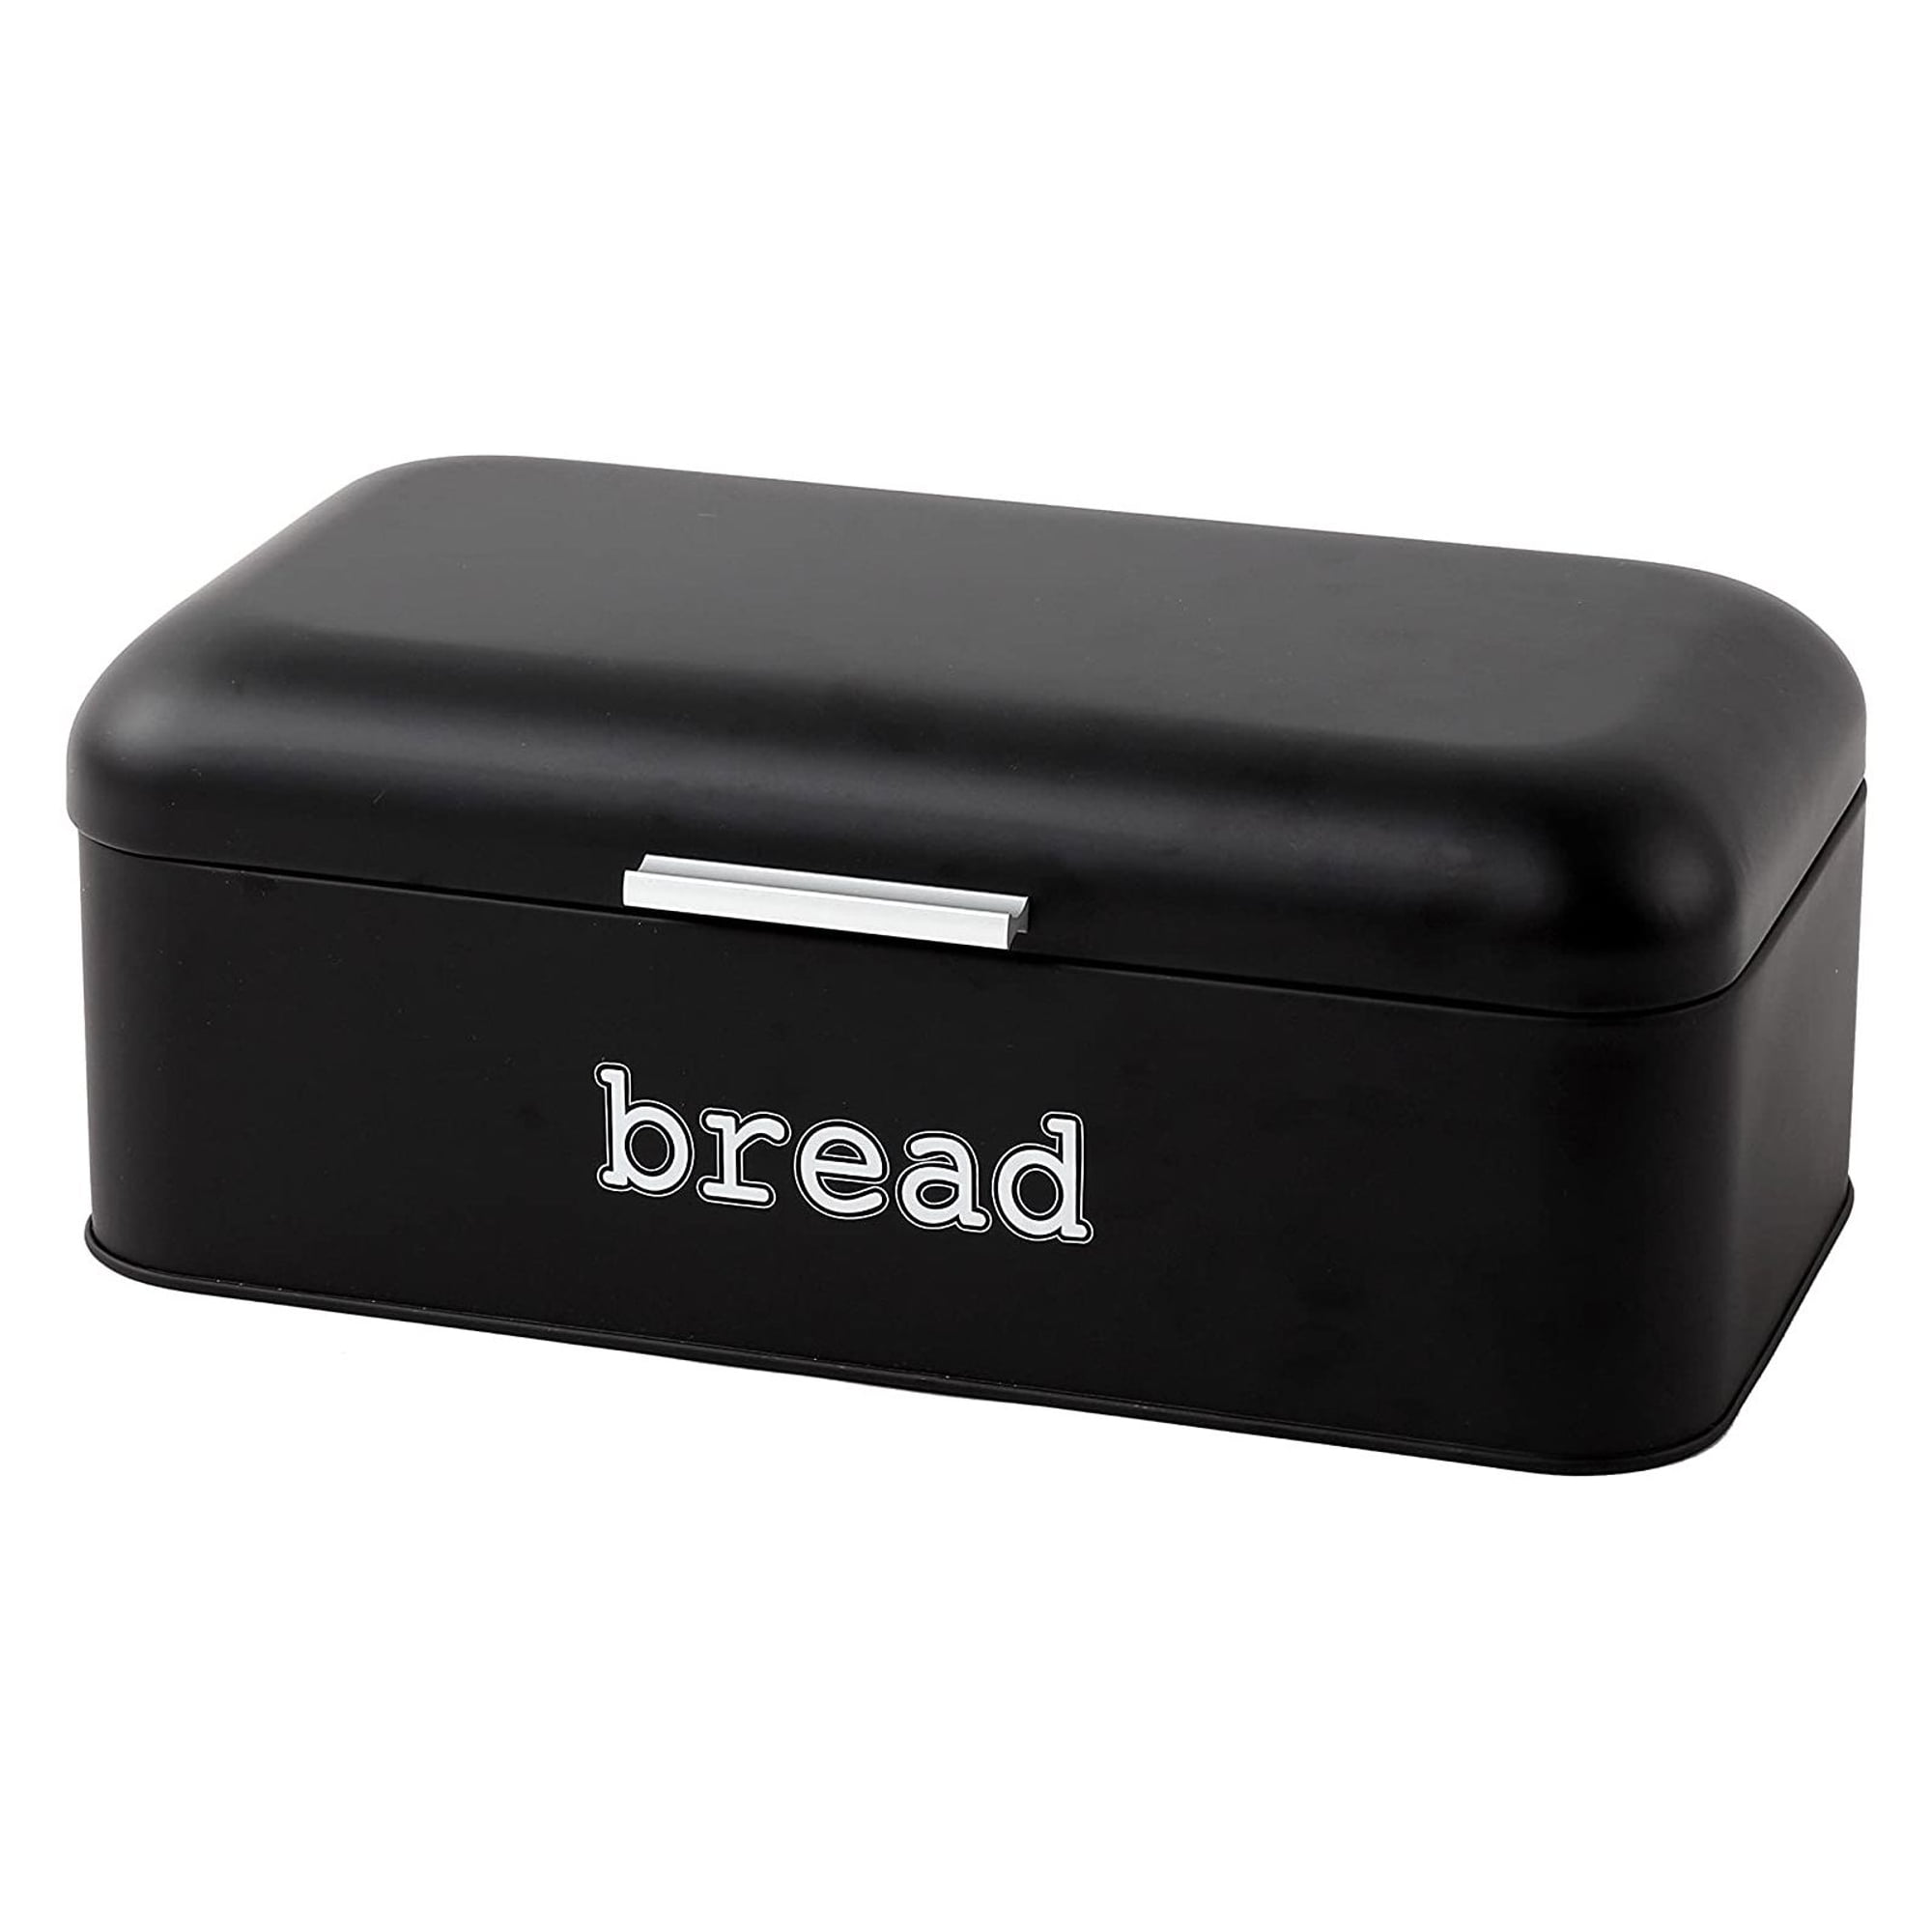 2 Pack Large Bread Box for Kitchen Countertop - Bed Bath & Beyond